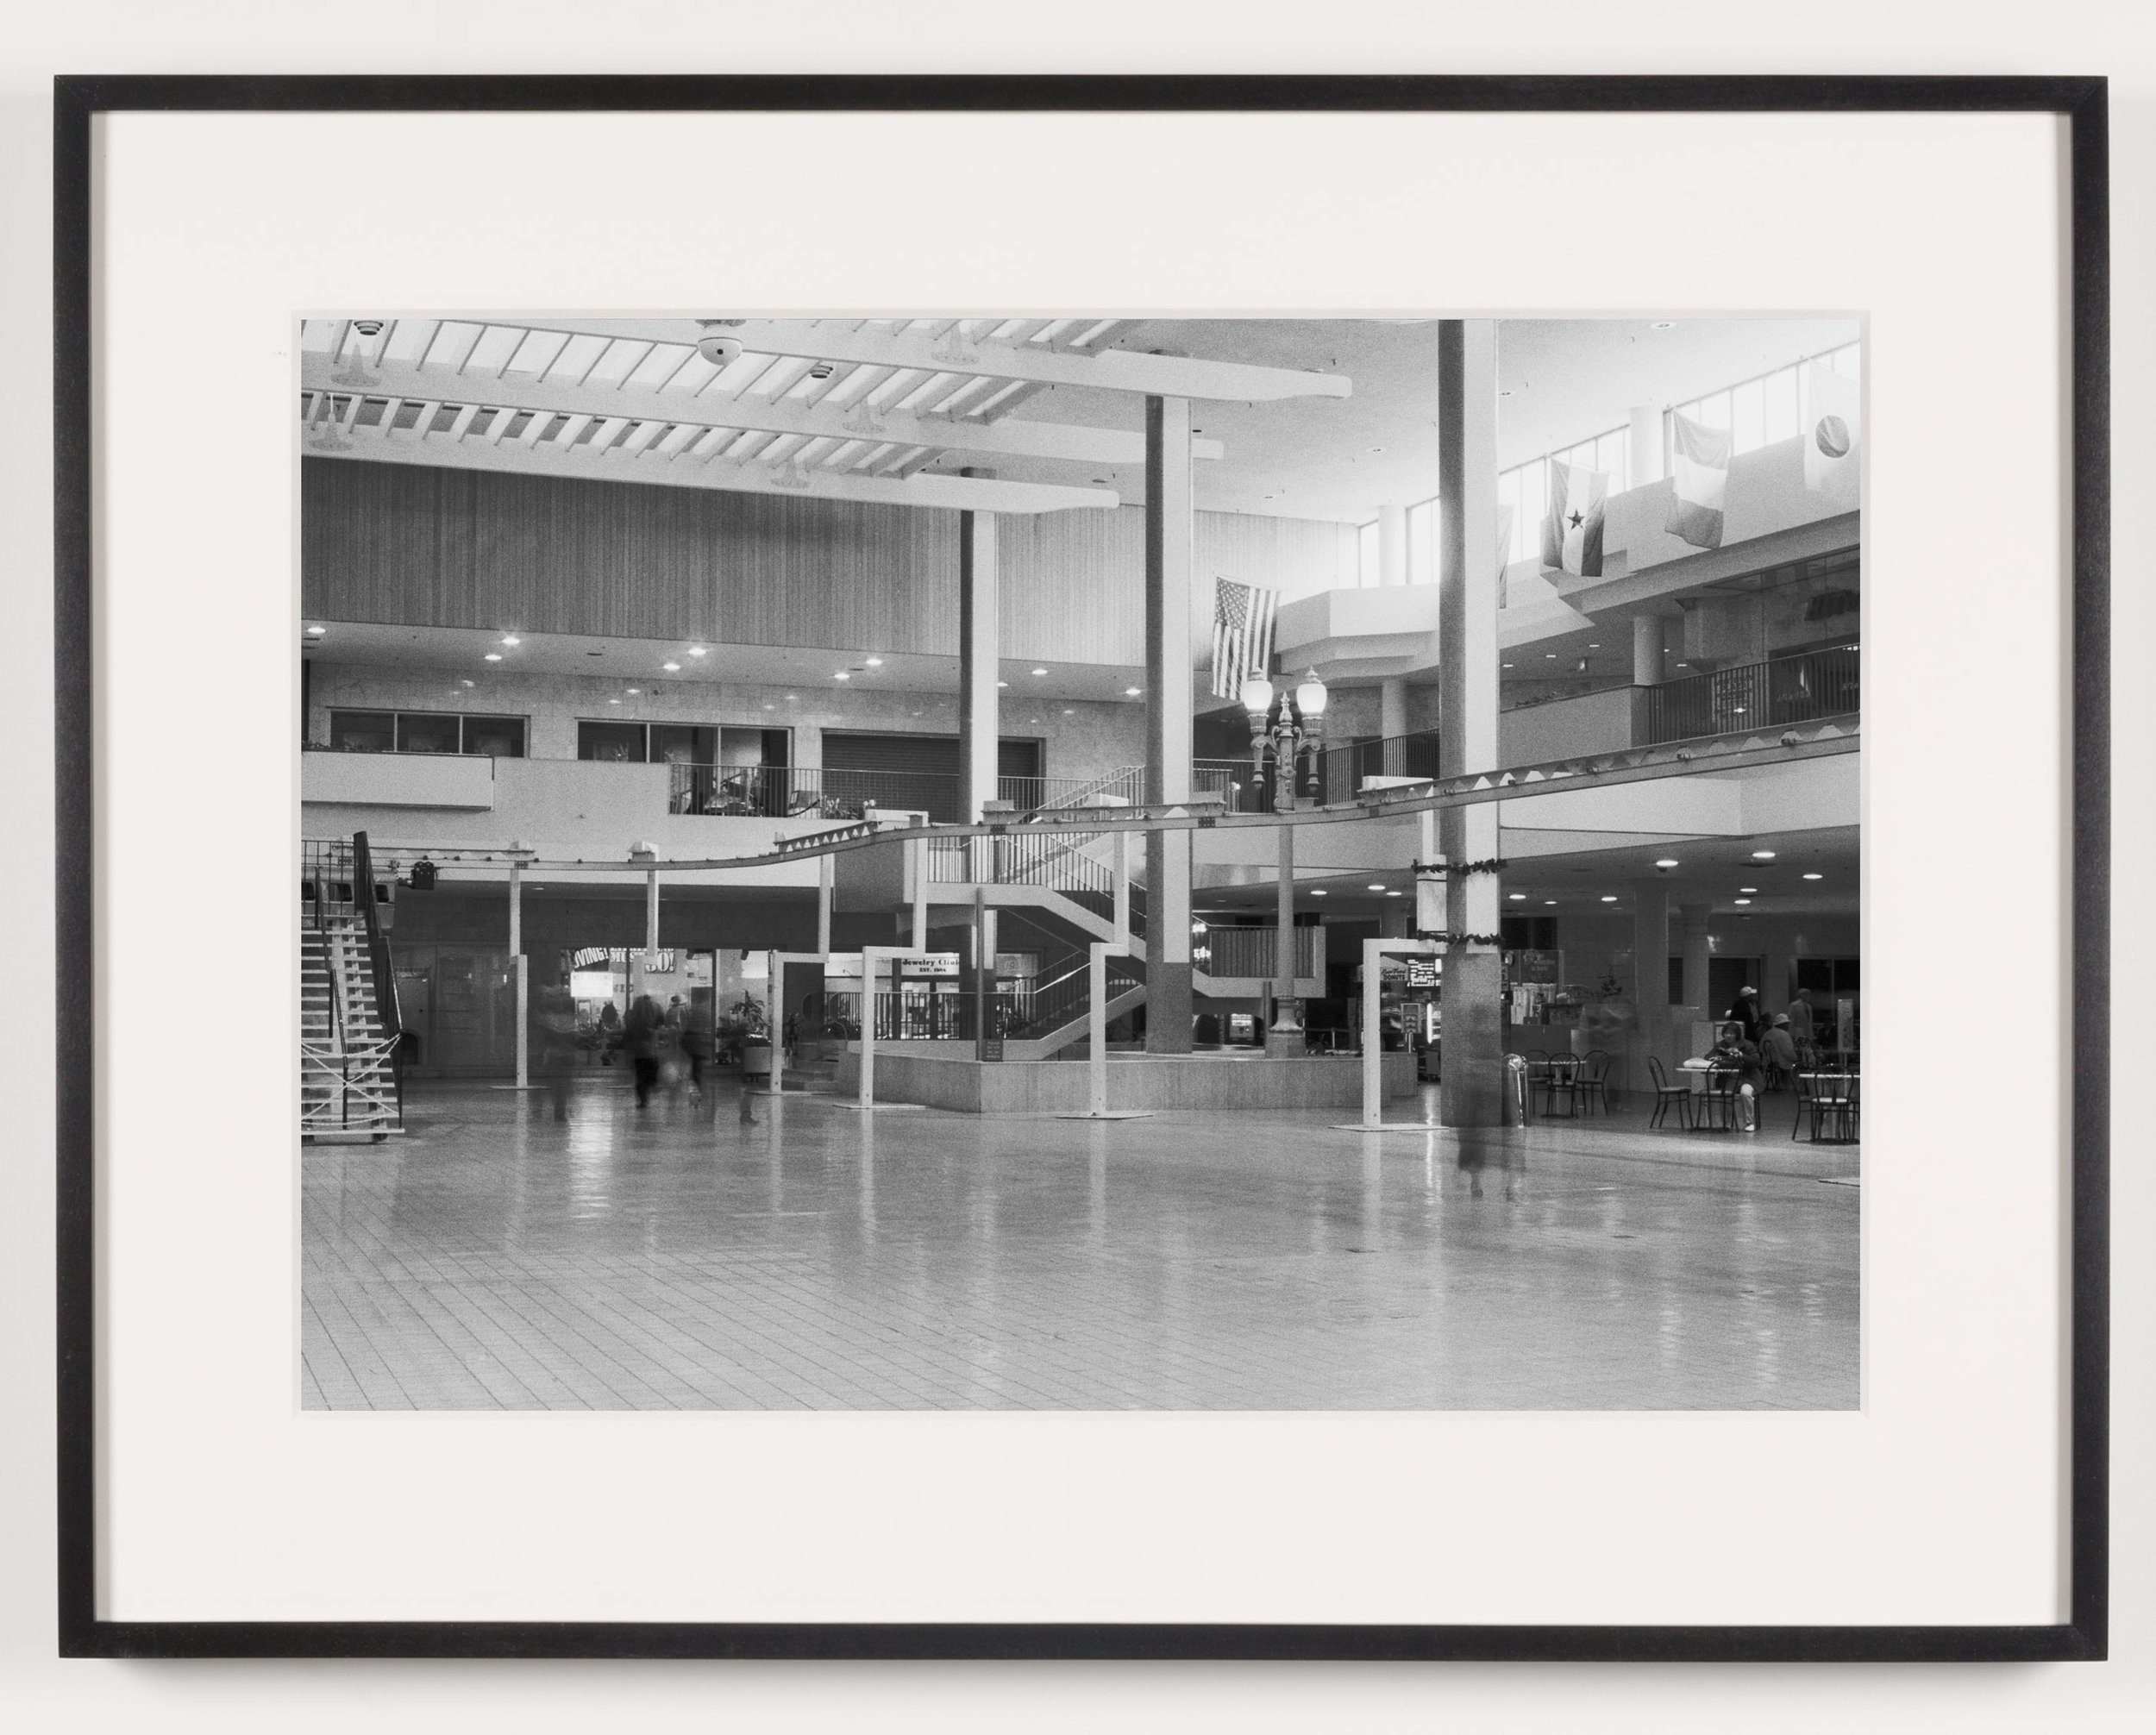   Midtown Plaza (View of Central Plaza Looking South), Rochester, NY. Est. 1962, Demo 2008   2011  Epson Ultrachrome K3 archival ink jet print on Hahnemühle Photo Rag paper  21 5/8 x 28 1/8 inches   American Passages, 2001–2011    A Diagram of Forces